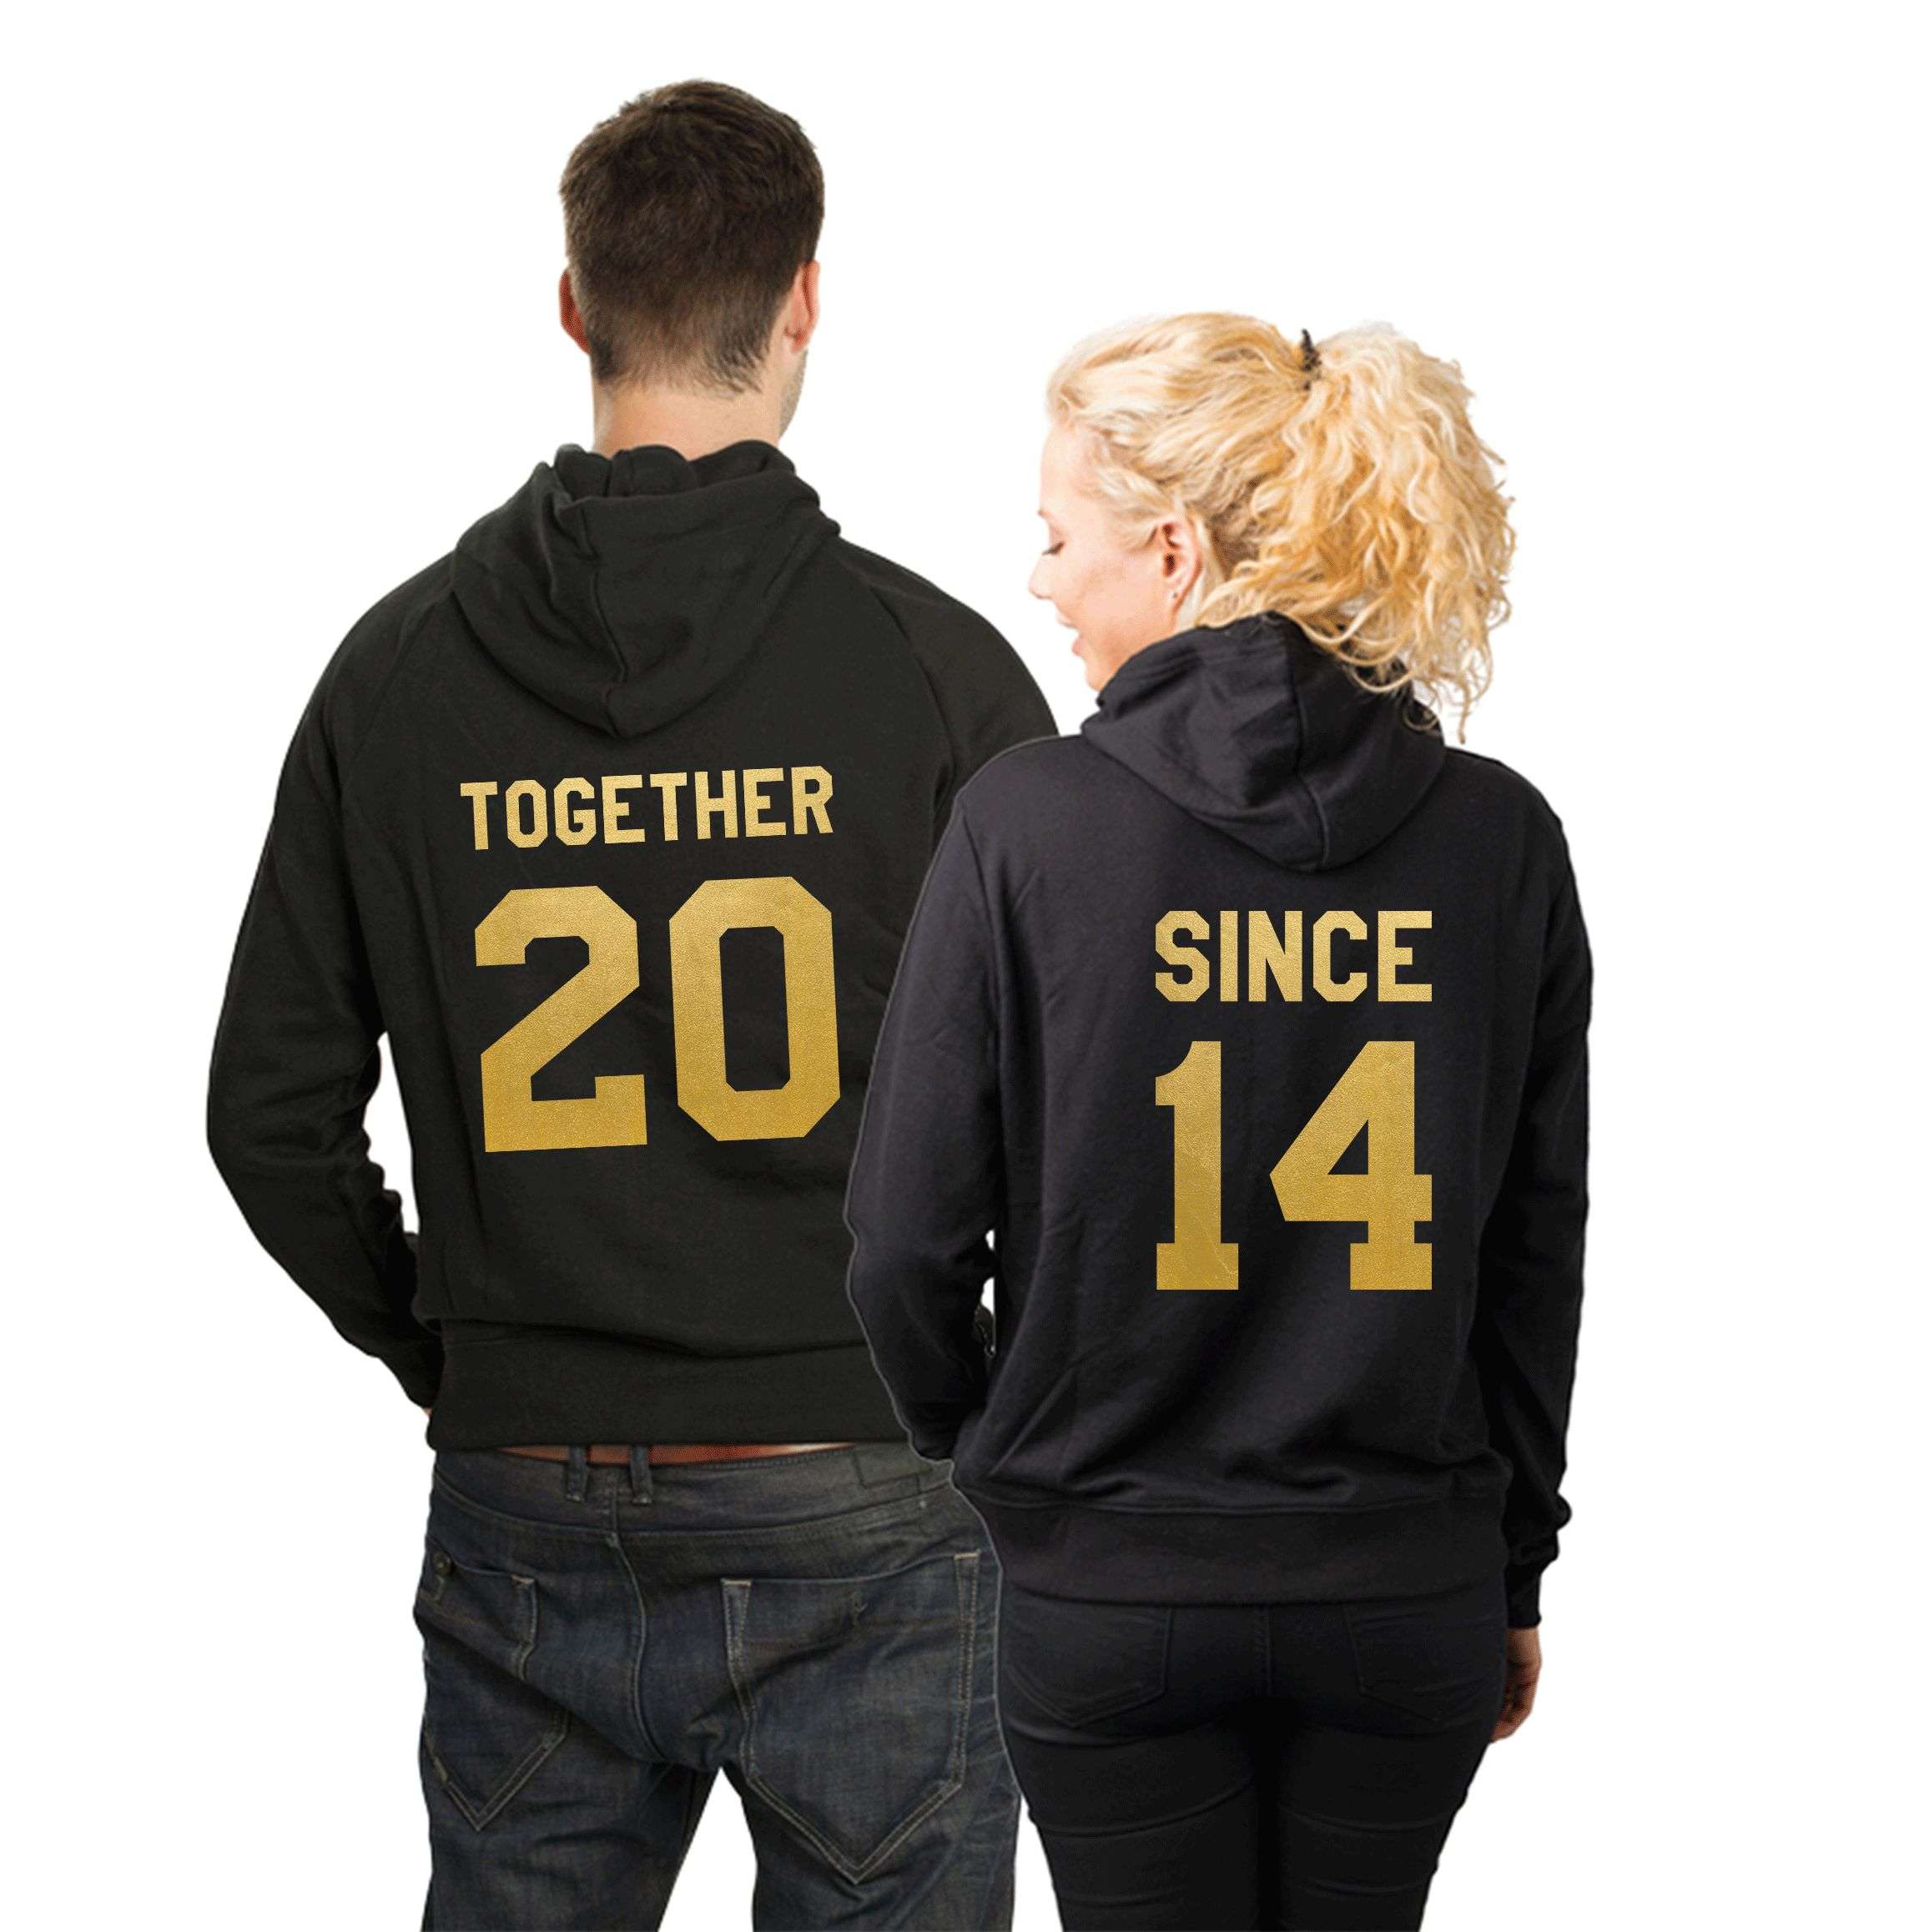 Couple Custom Made Sweatshirts Together Since King And Queen Matching Crewnecks